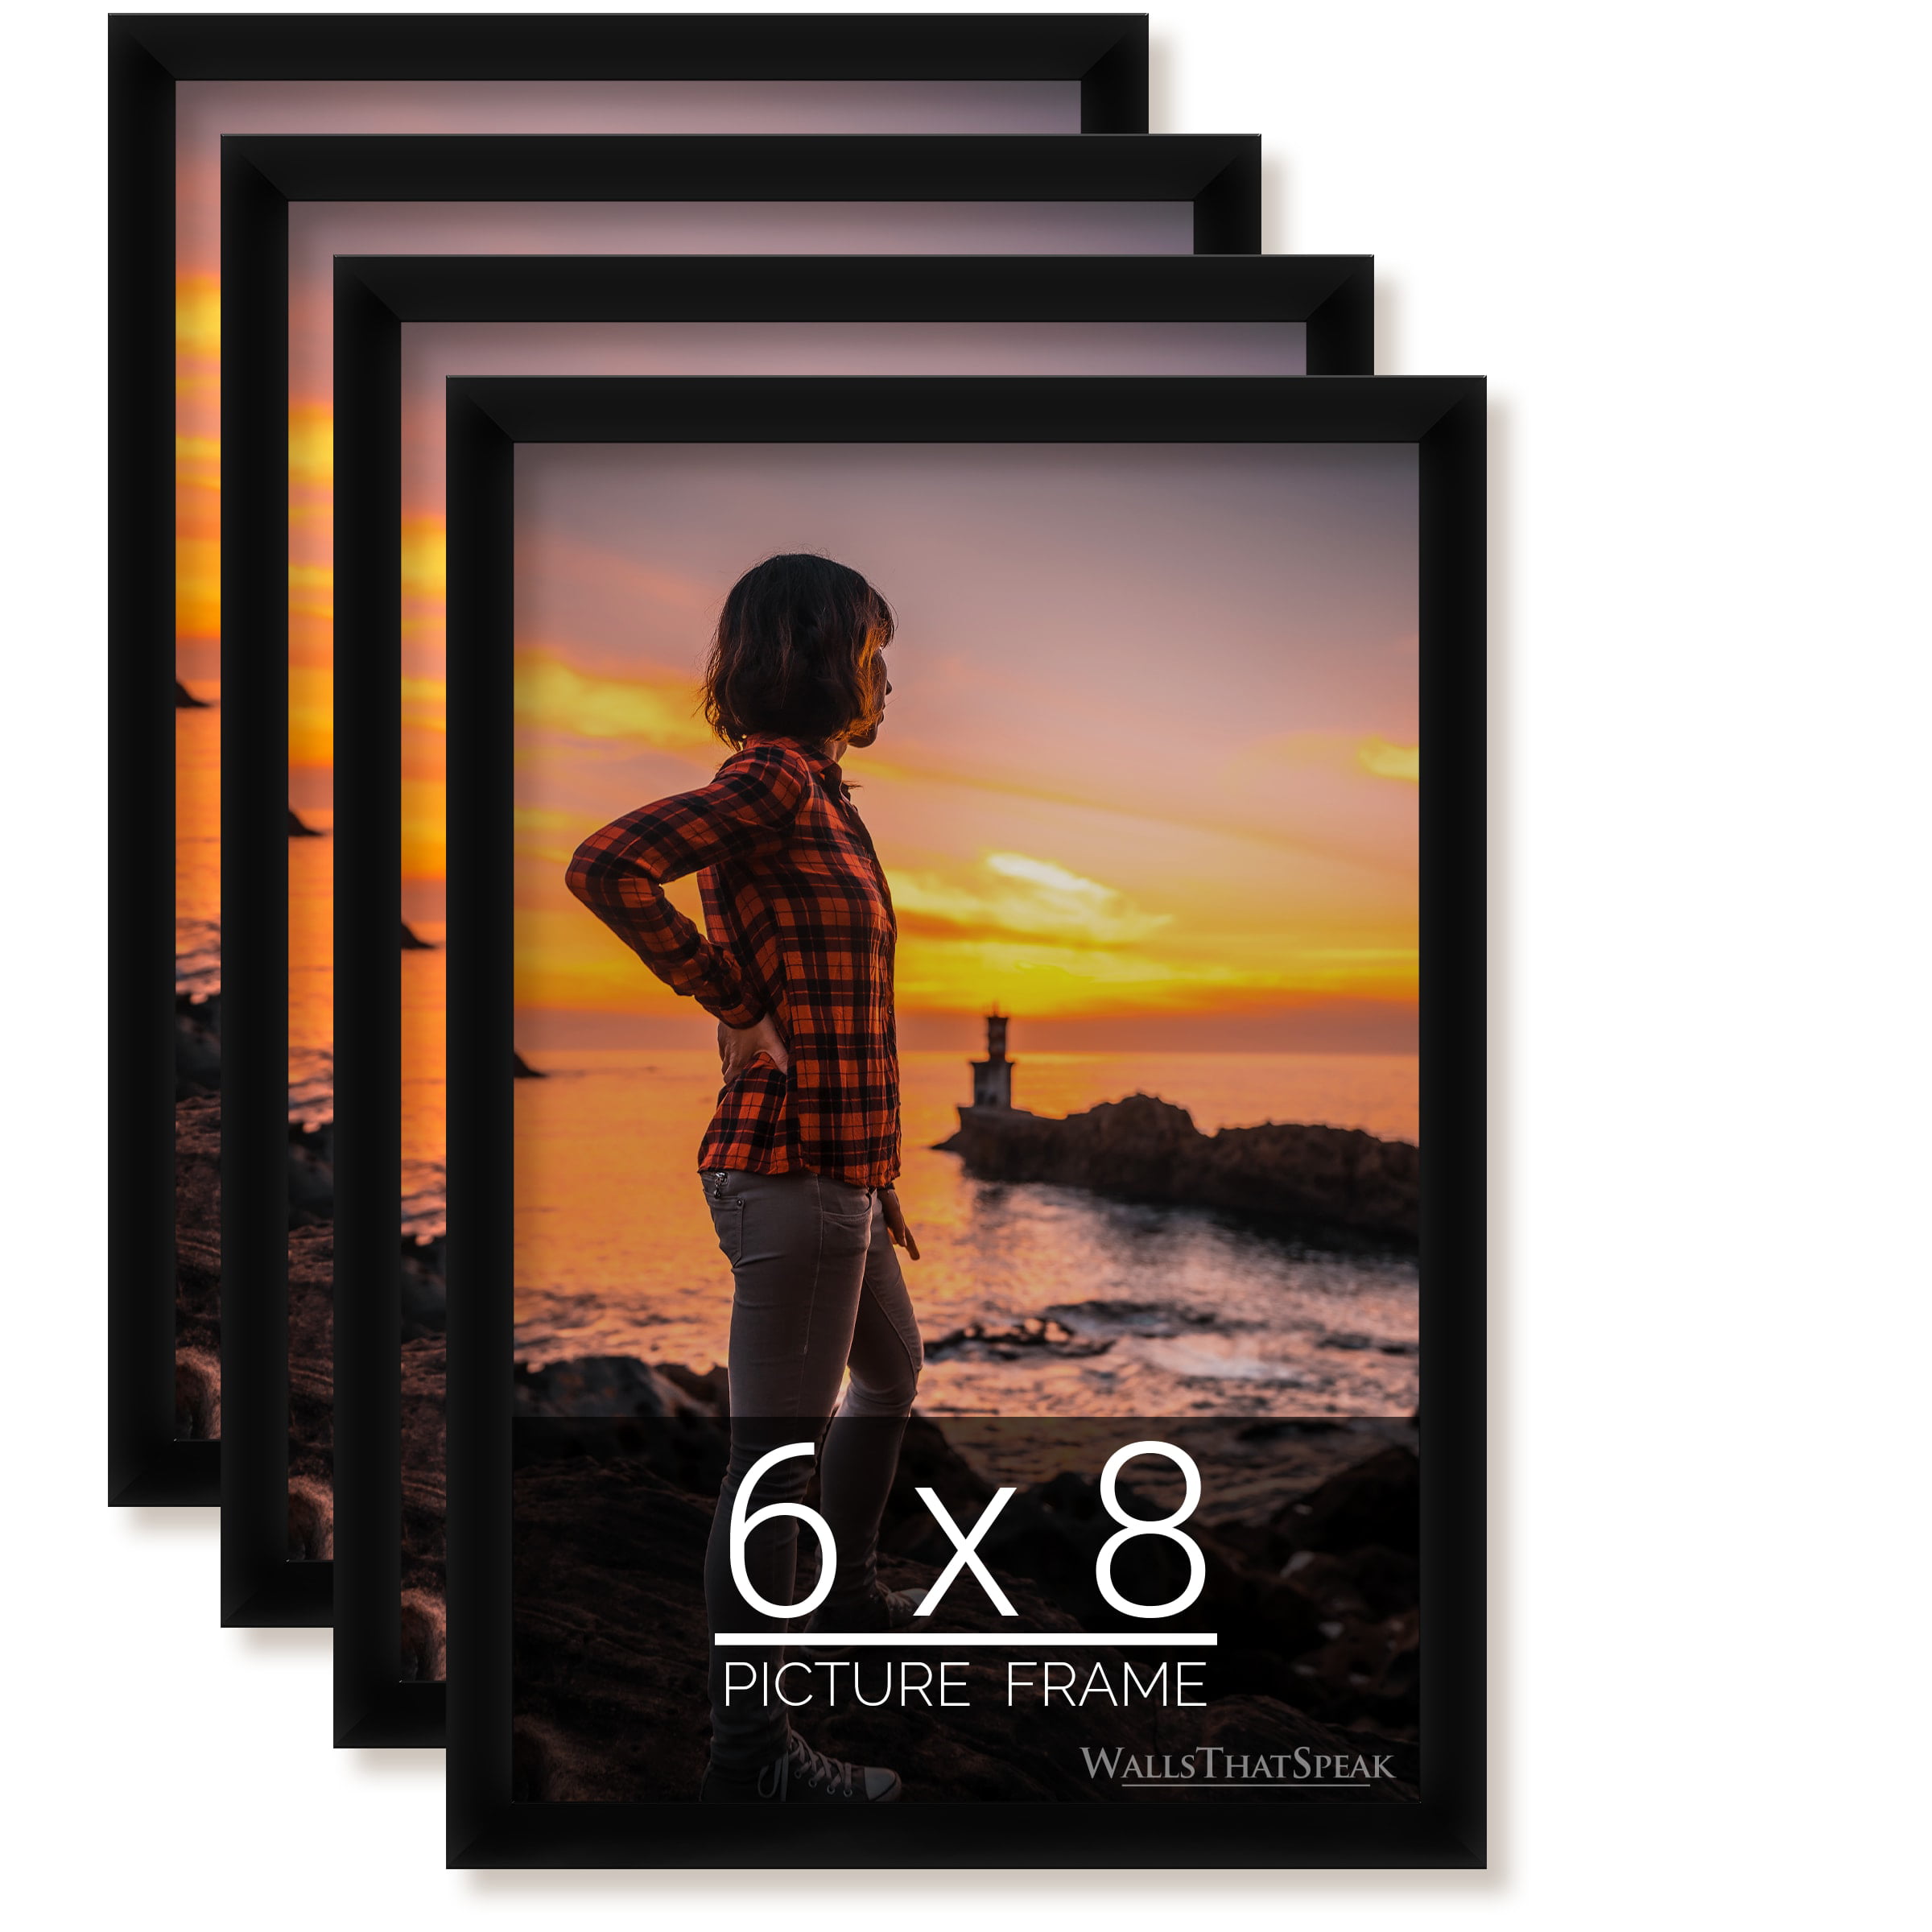 6x8 Black Picture Frame for Puzzles Posters Photos or Artwork, Set of 4